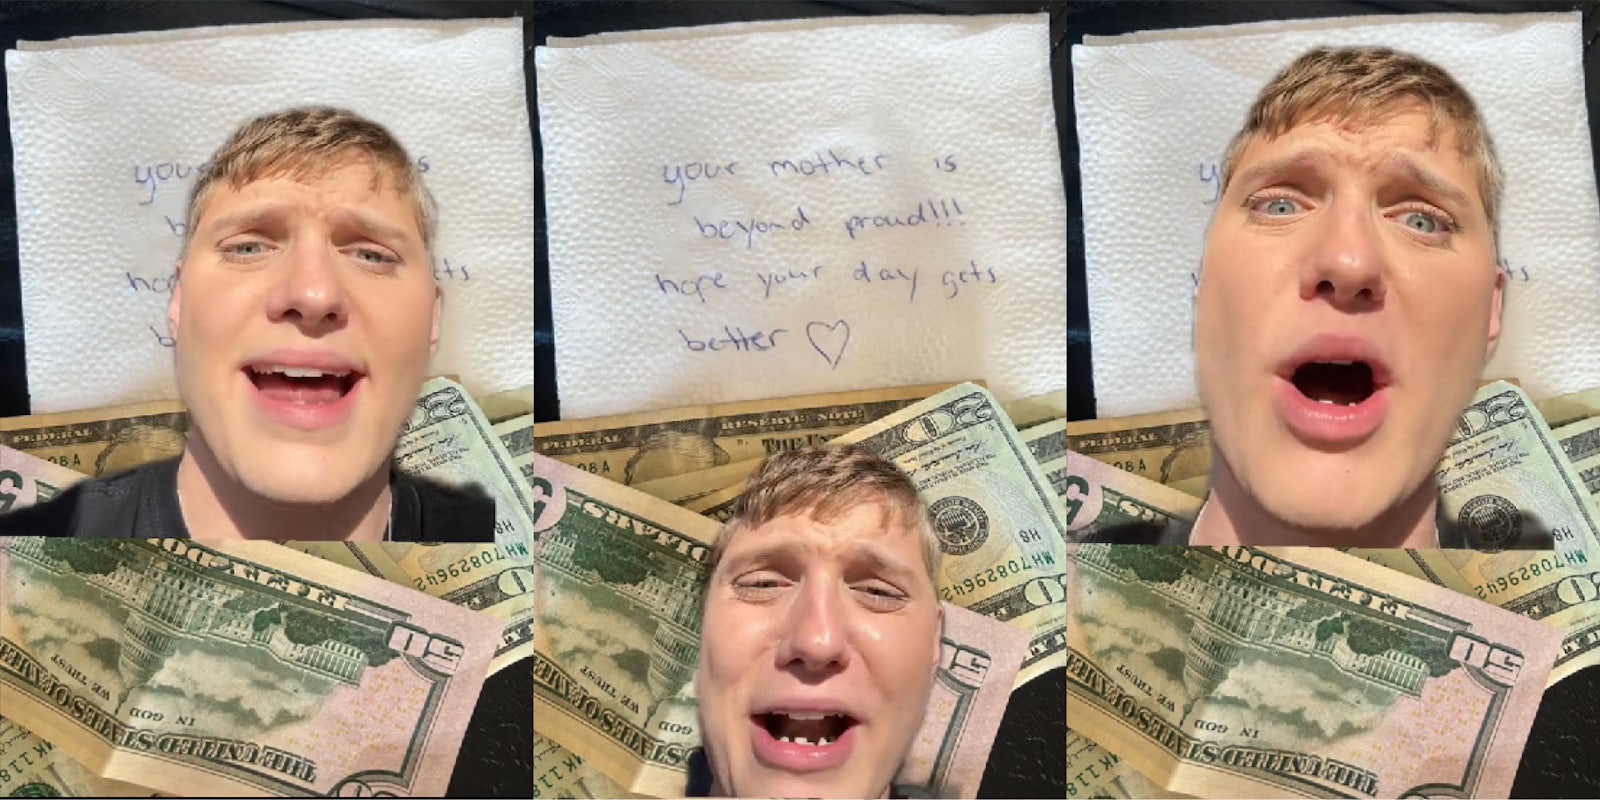 server greenscreen TikTok over image of cash and note written on napkin (l) server greenscreen TikTok over image of cash and note written on napkin 'your mother is beyond proud!!! hope your day gets better' (c) server greenscreen TikTok over image of cash and note written on napkin (r)